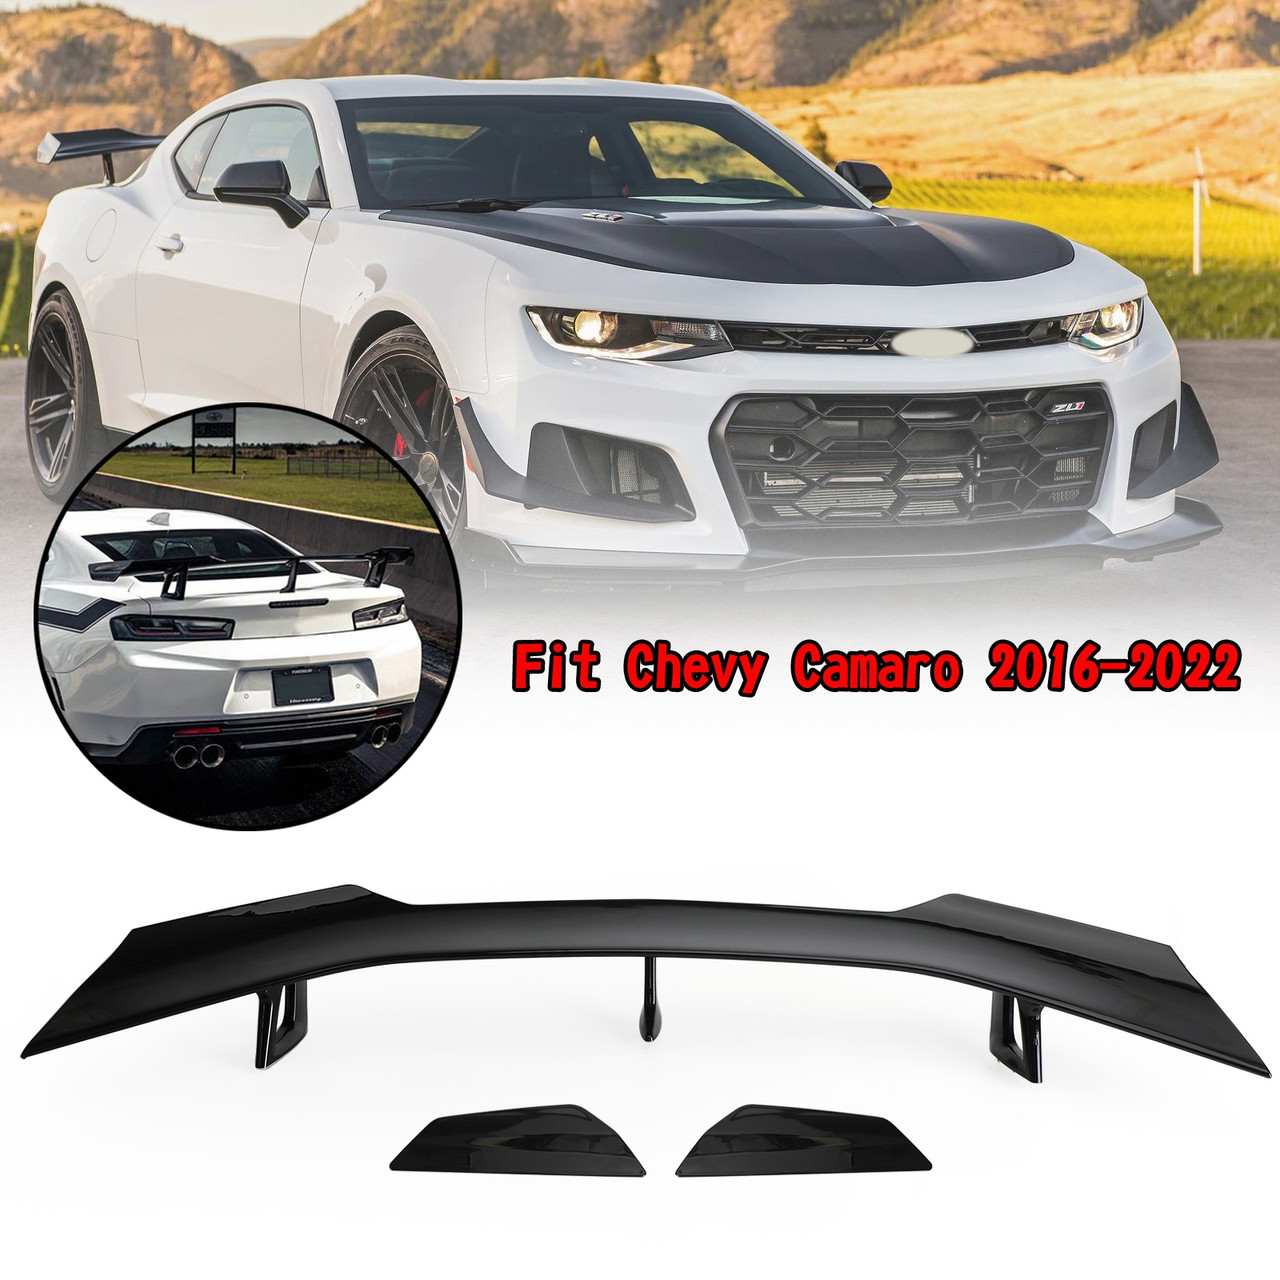 ZL1 1LE Style Rear Trunk Wing Spoiler Fit for Chevy Camaro 2016-2022 Gloss Black